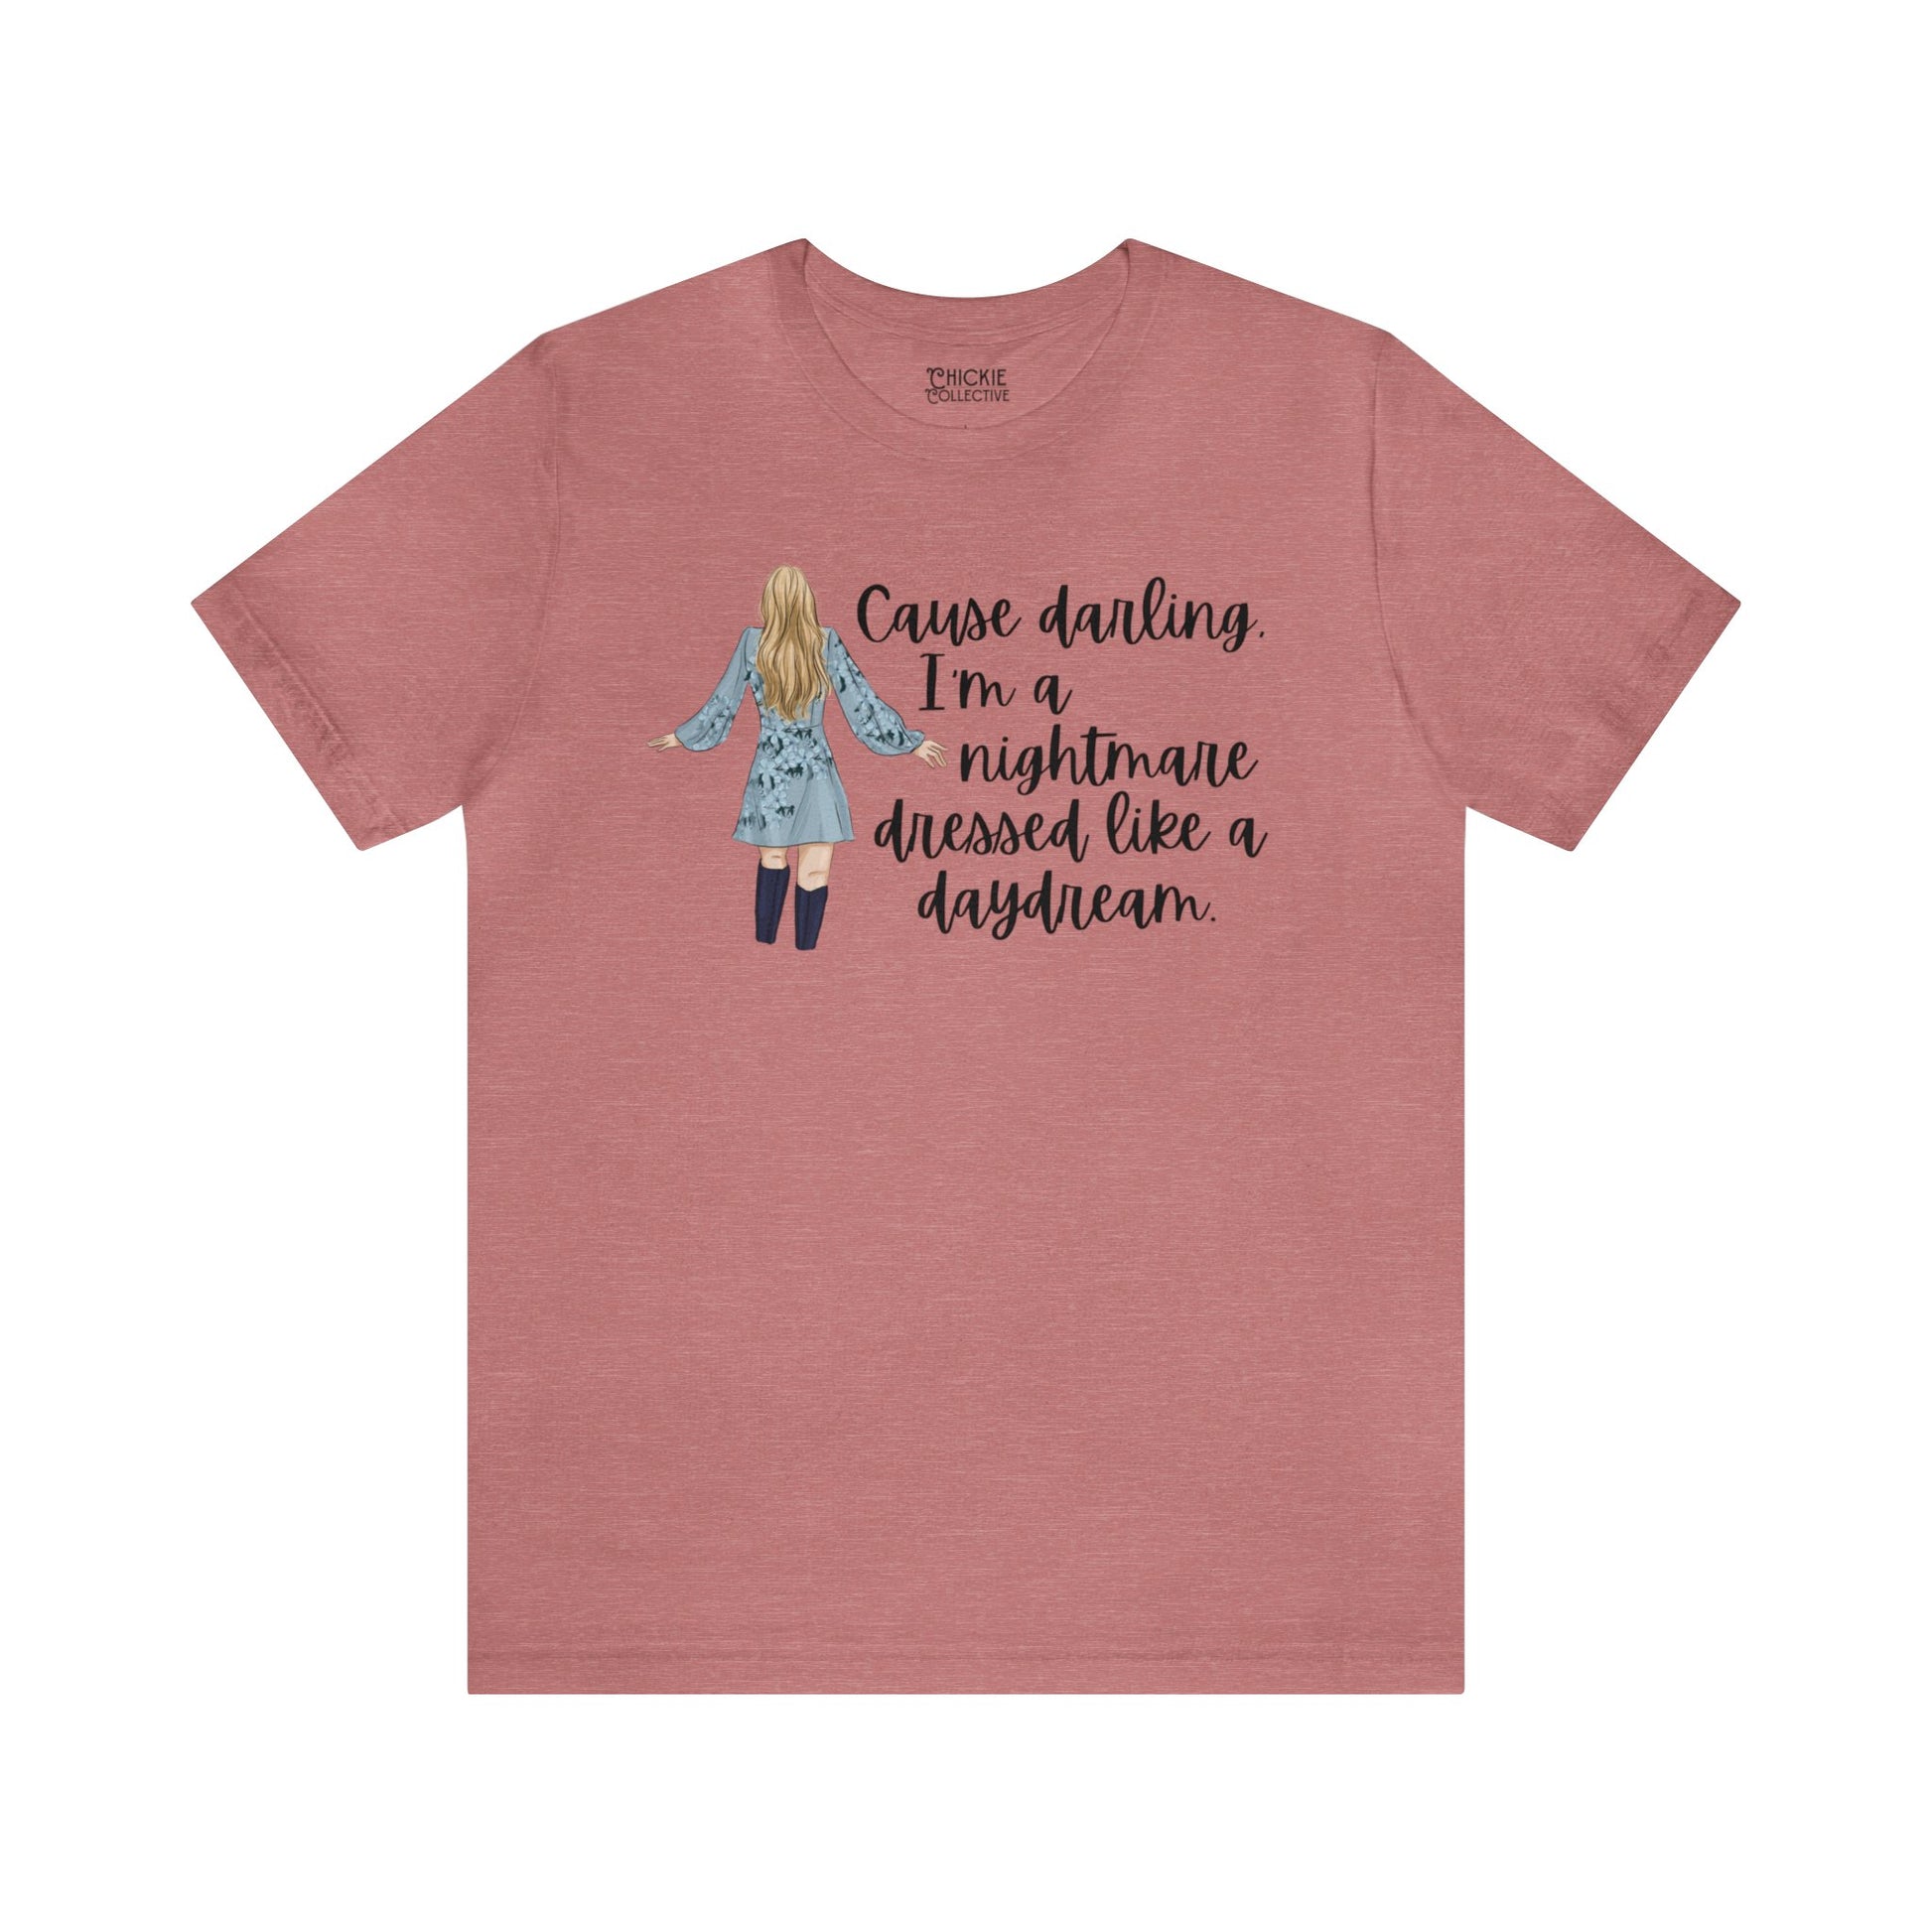 Taylor Swift Preppy Picture T-Shirt - Cause Darling I'm A Nightmare T-Shirt Heather Mauve S  - Chickie Collective